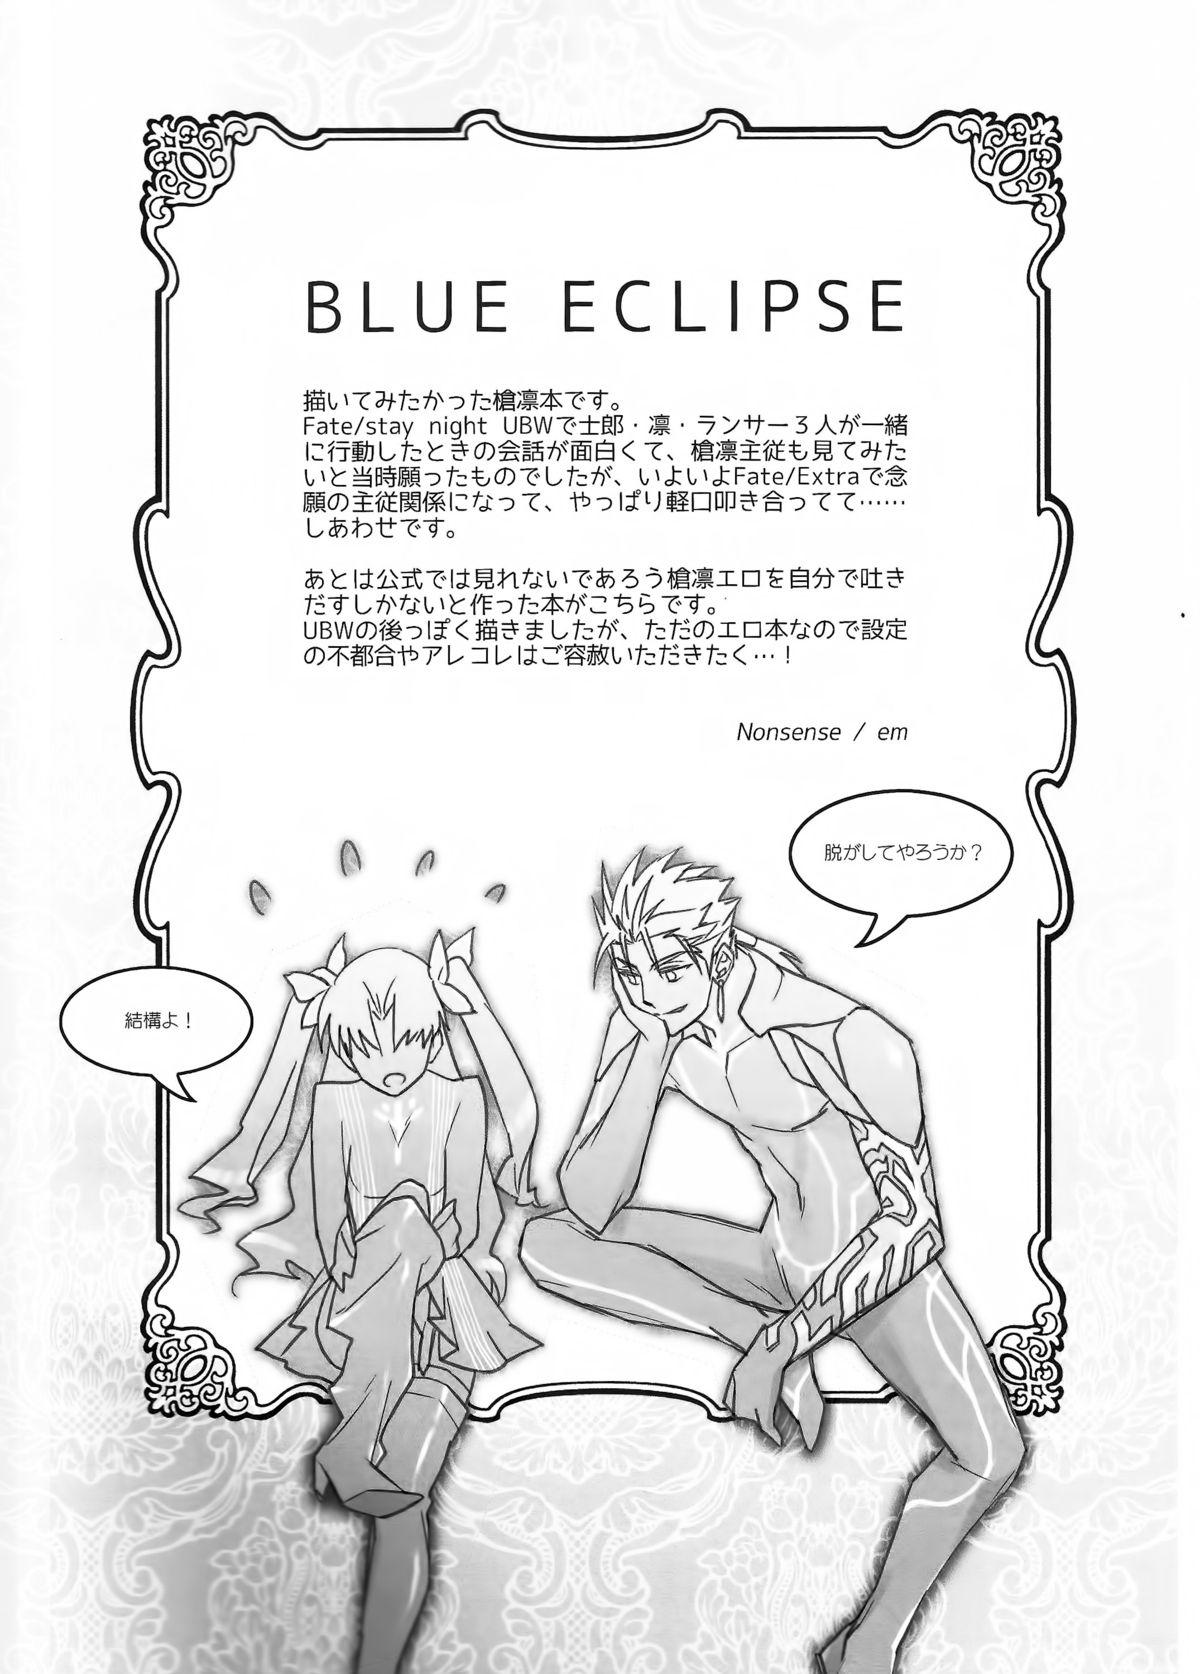 Spy Cam BLUE ECLIPSE - Fate stay night Pussy Eating - Page 2